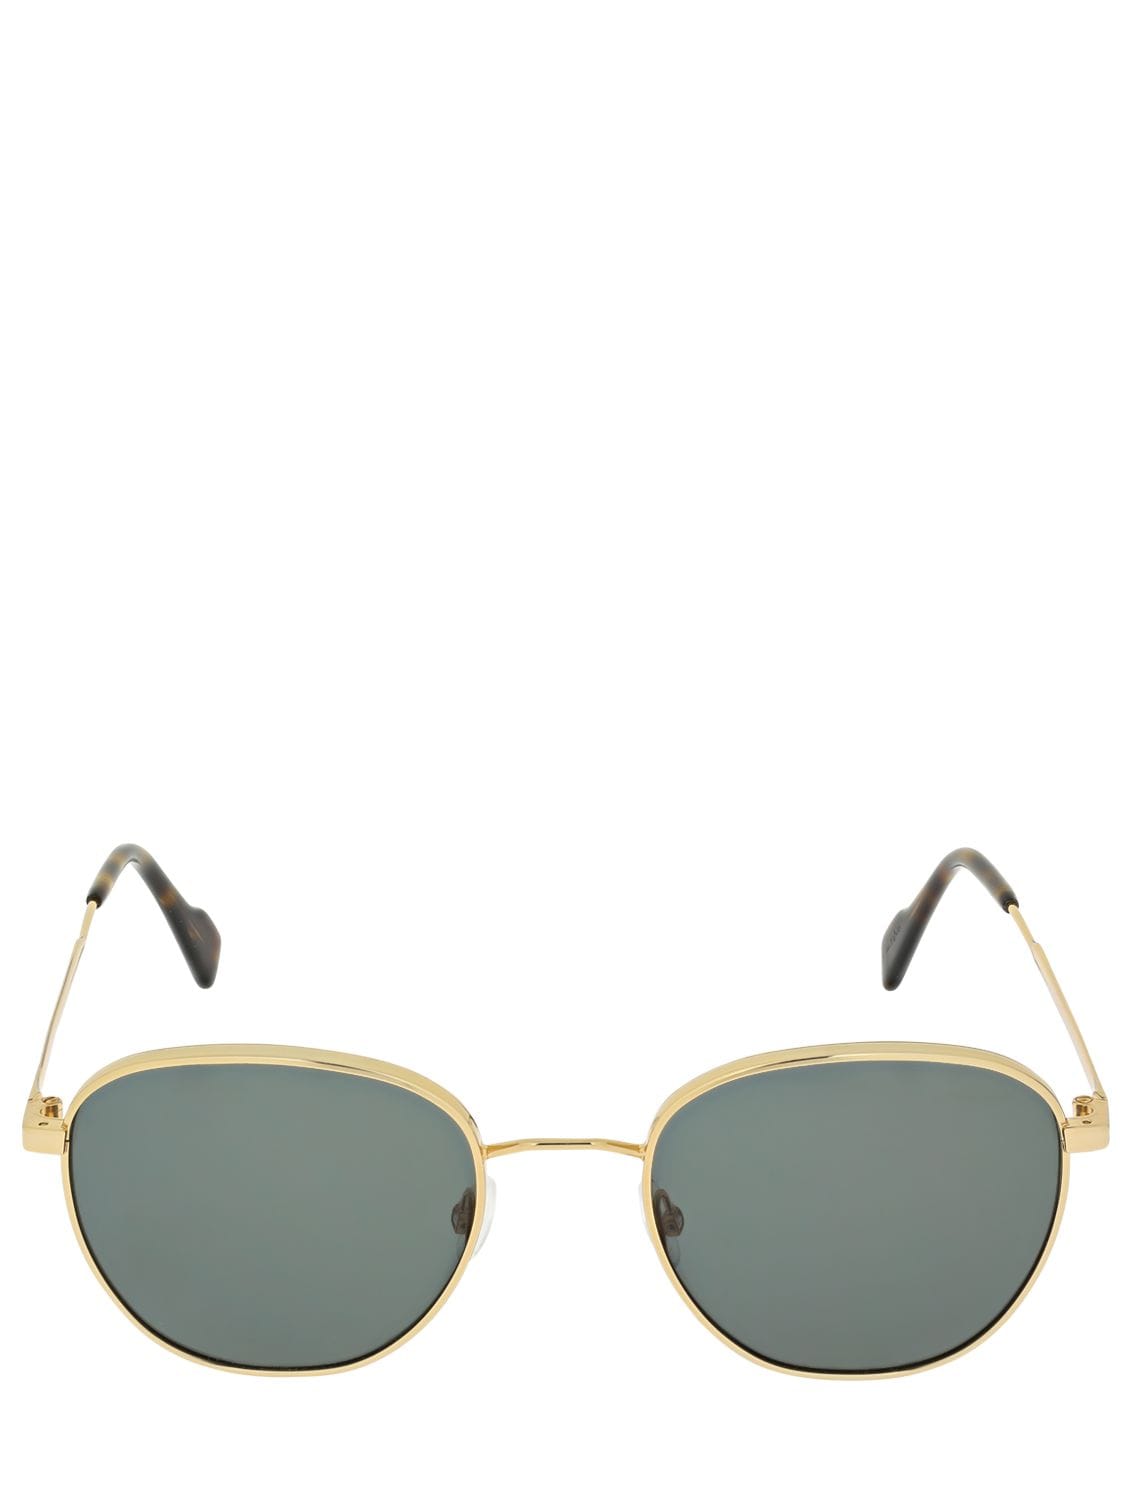 Andy Wolf Turner Round Metal Sunglasses In Gold,green